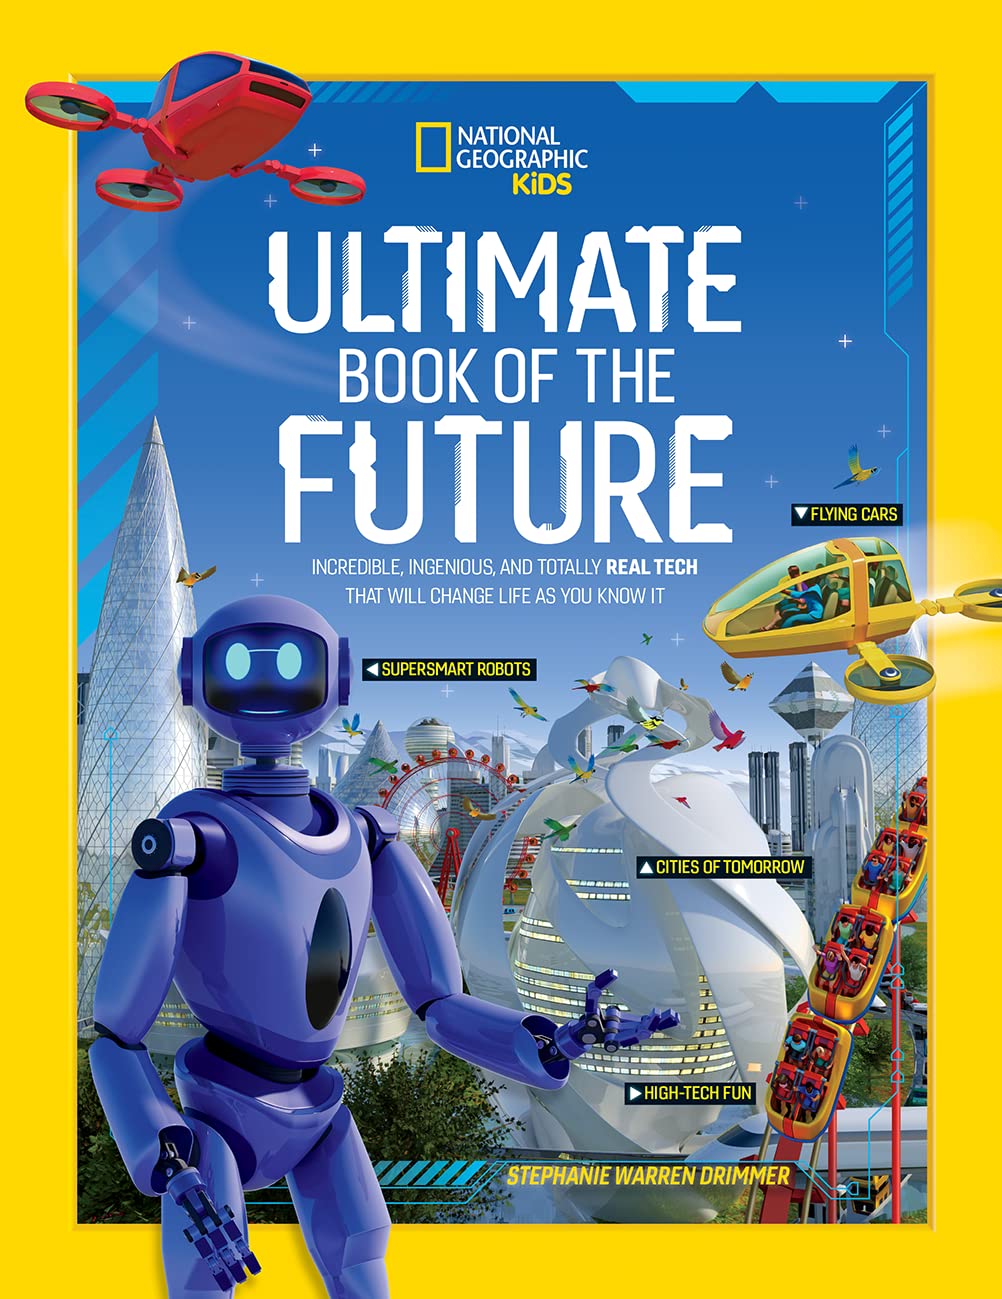 Ultimate book of the future